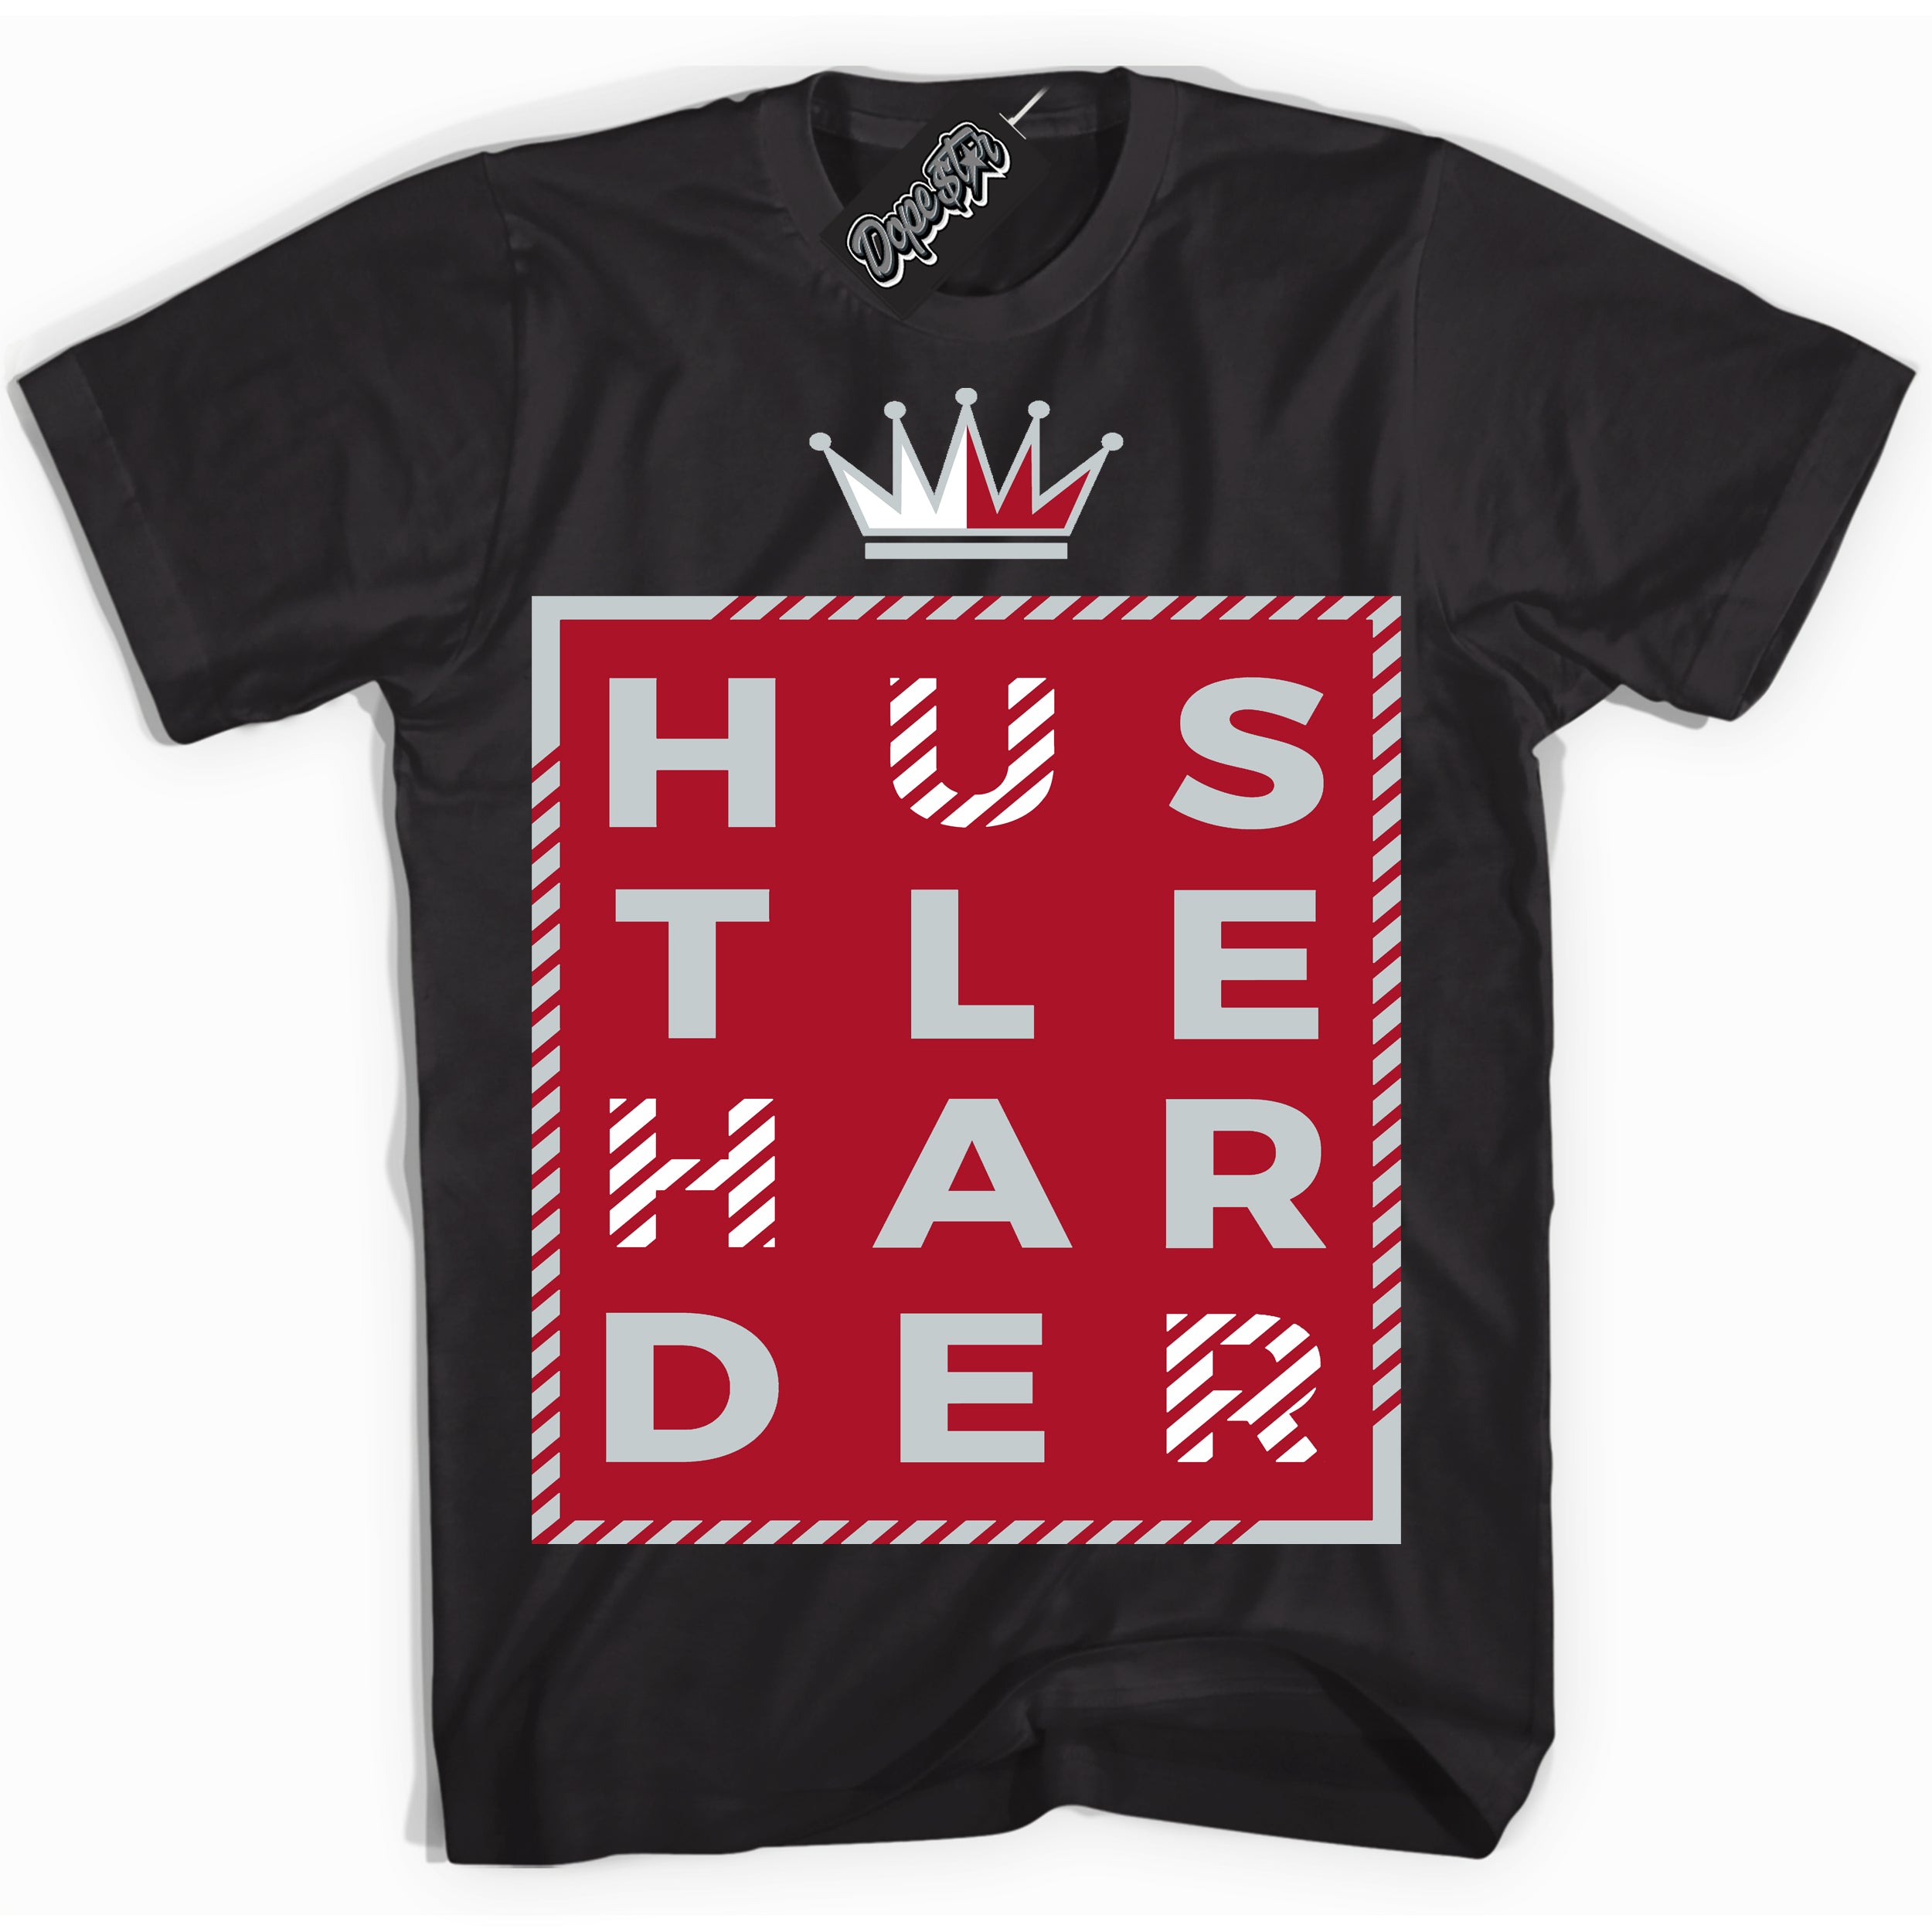 Cool Black Shirt with “ Hustle Harder ” design that perfectly matches Reverse Ultraman Sneakers.